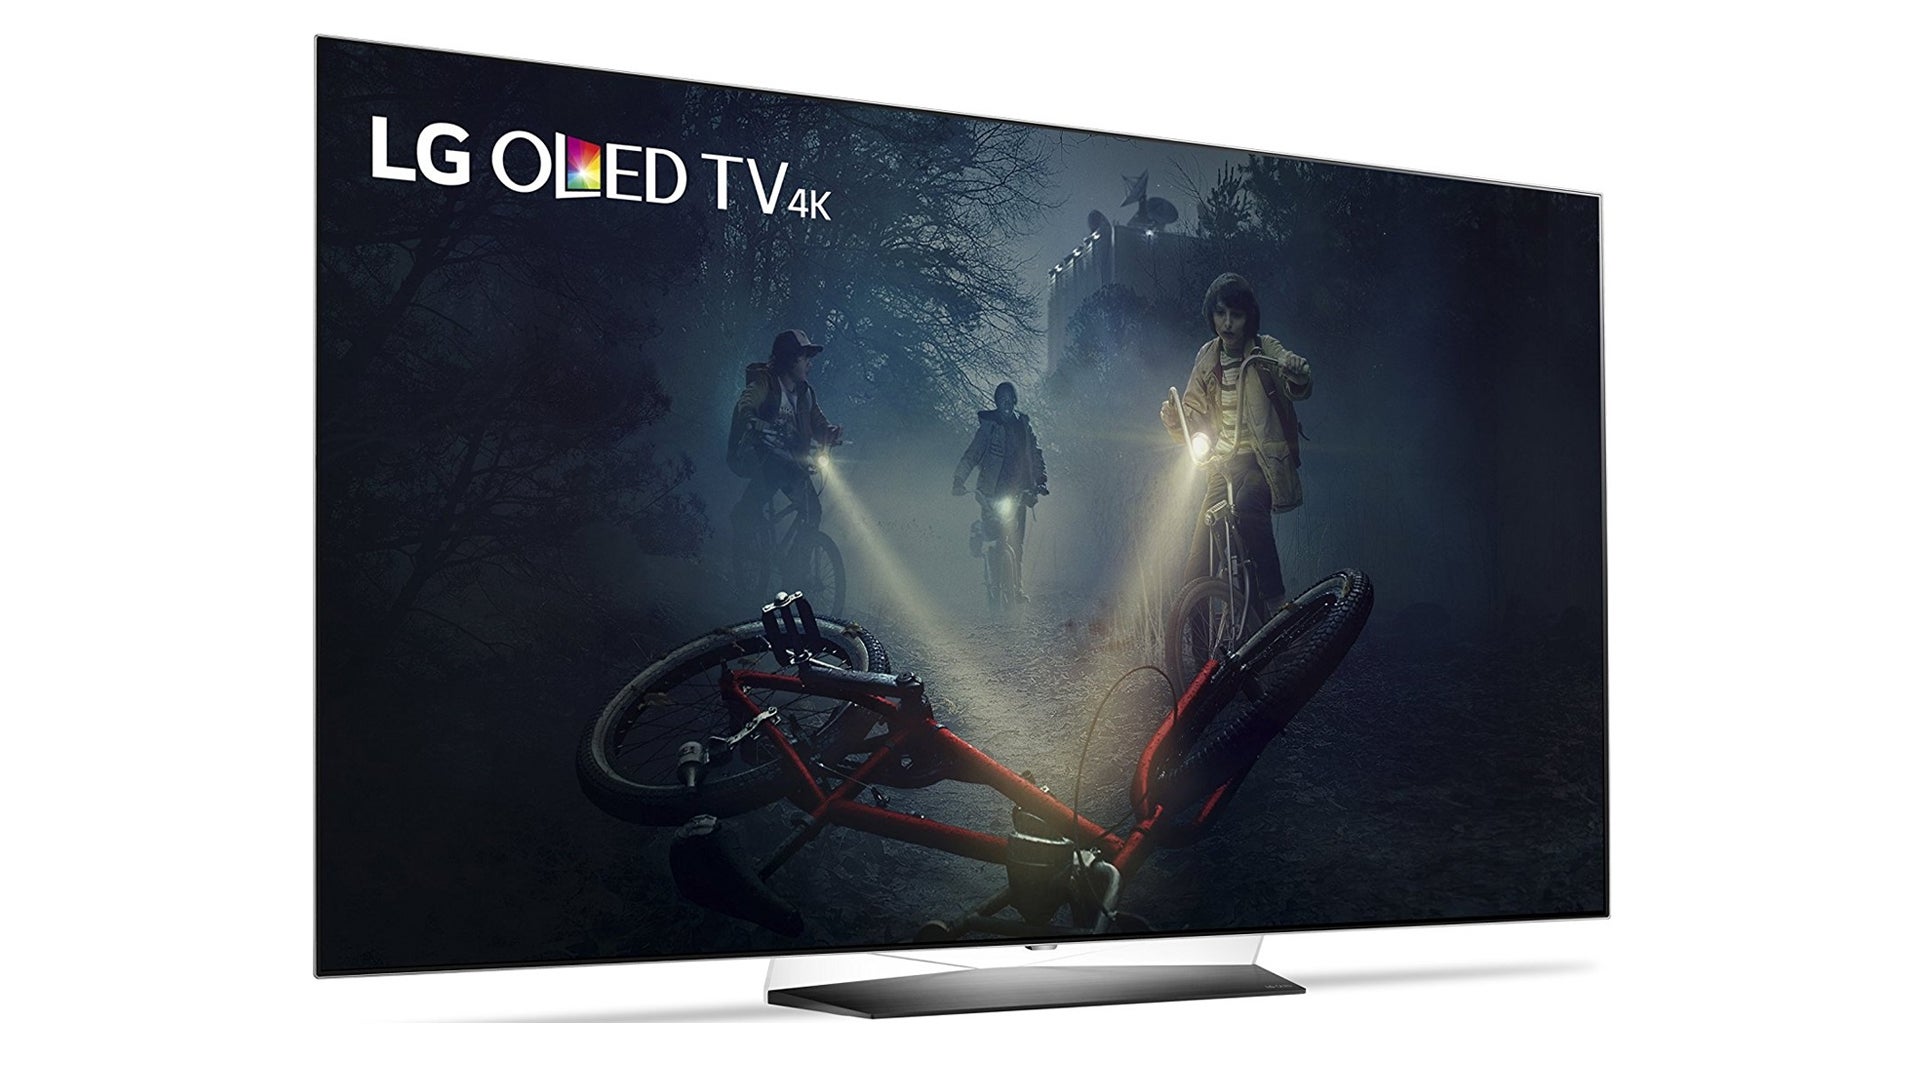 Image for LG's 55-inch OLED 4K TV is down to $1,500 this week at NewEgg